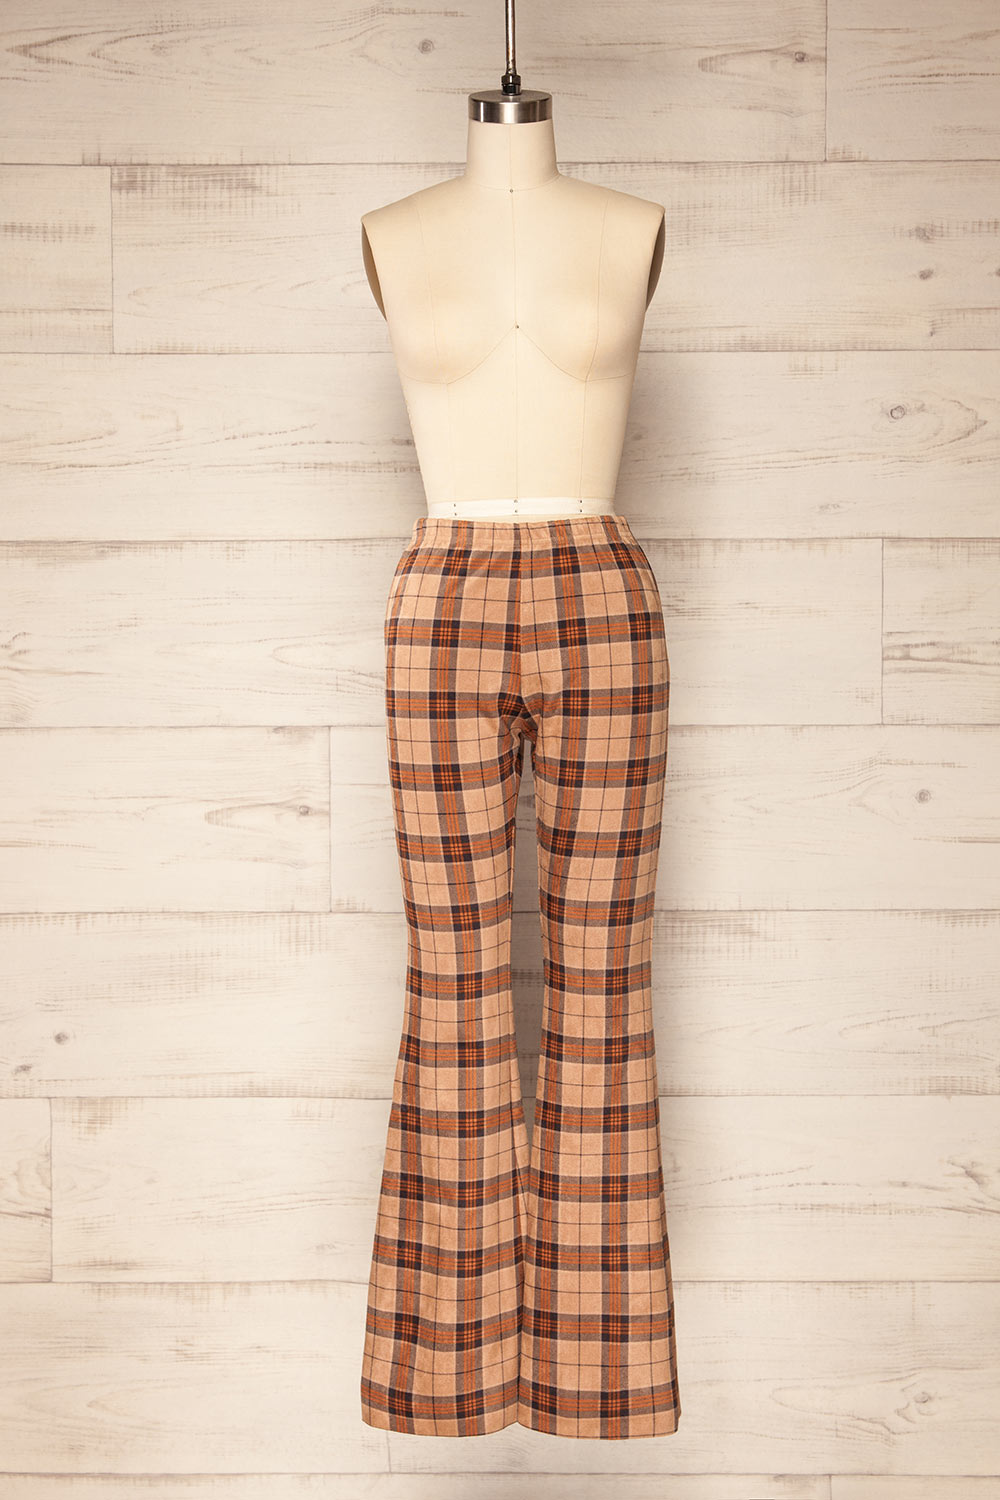 Lily Black & Brown Plaid Ombré Straight-Leg Pants - Women & Plus | Best  Price and Reviews | Zulily